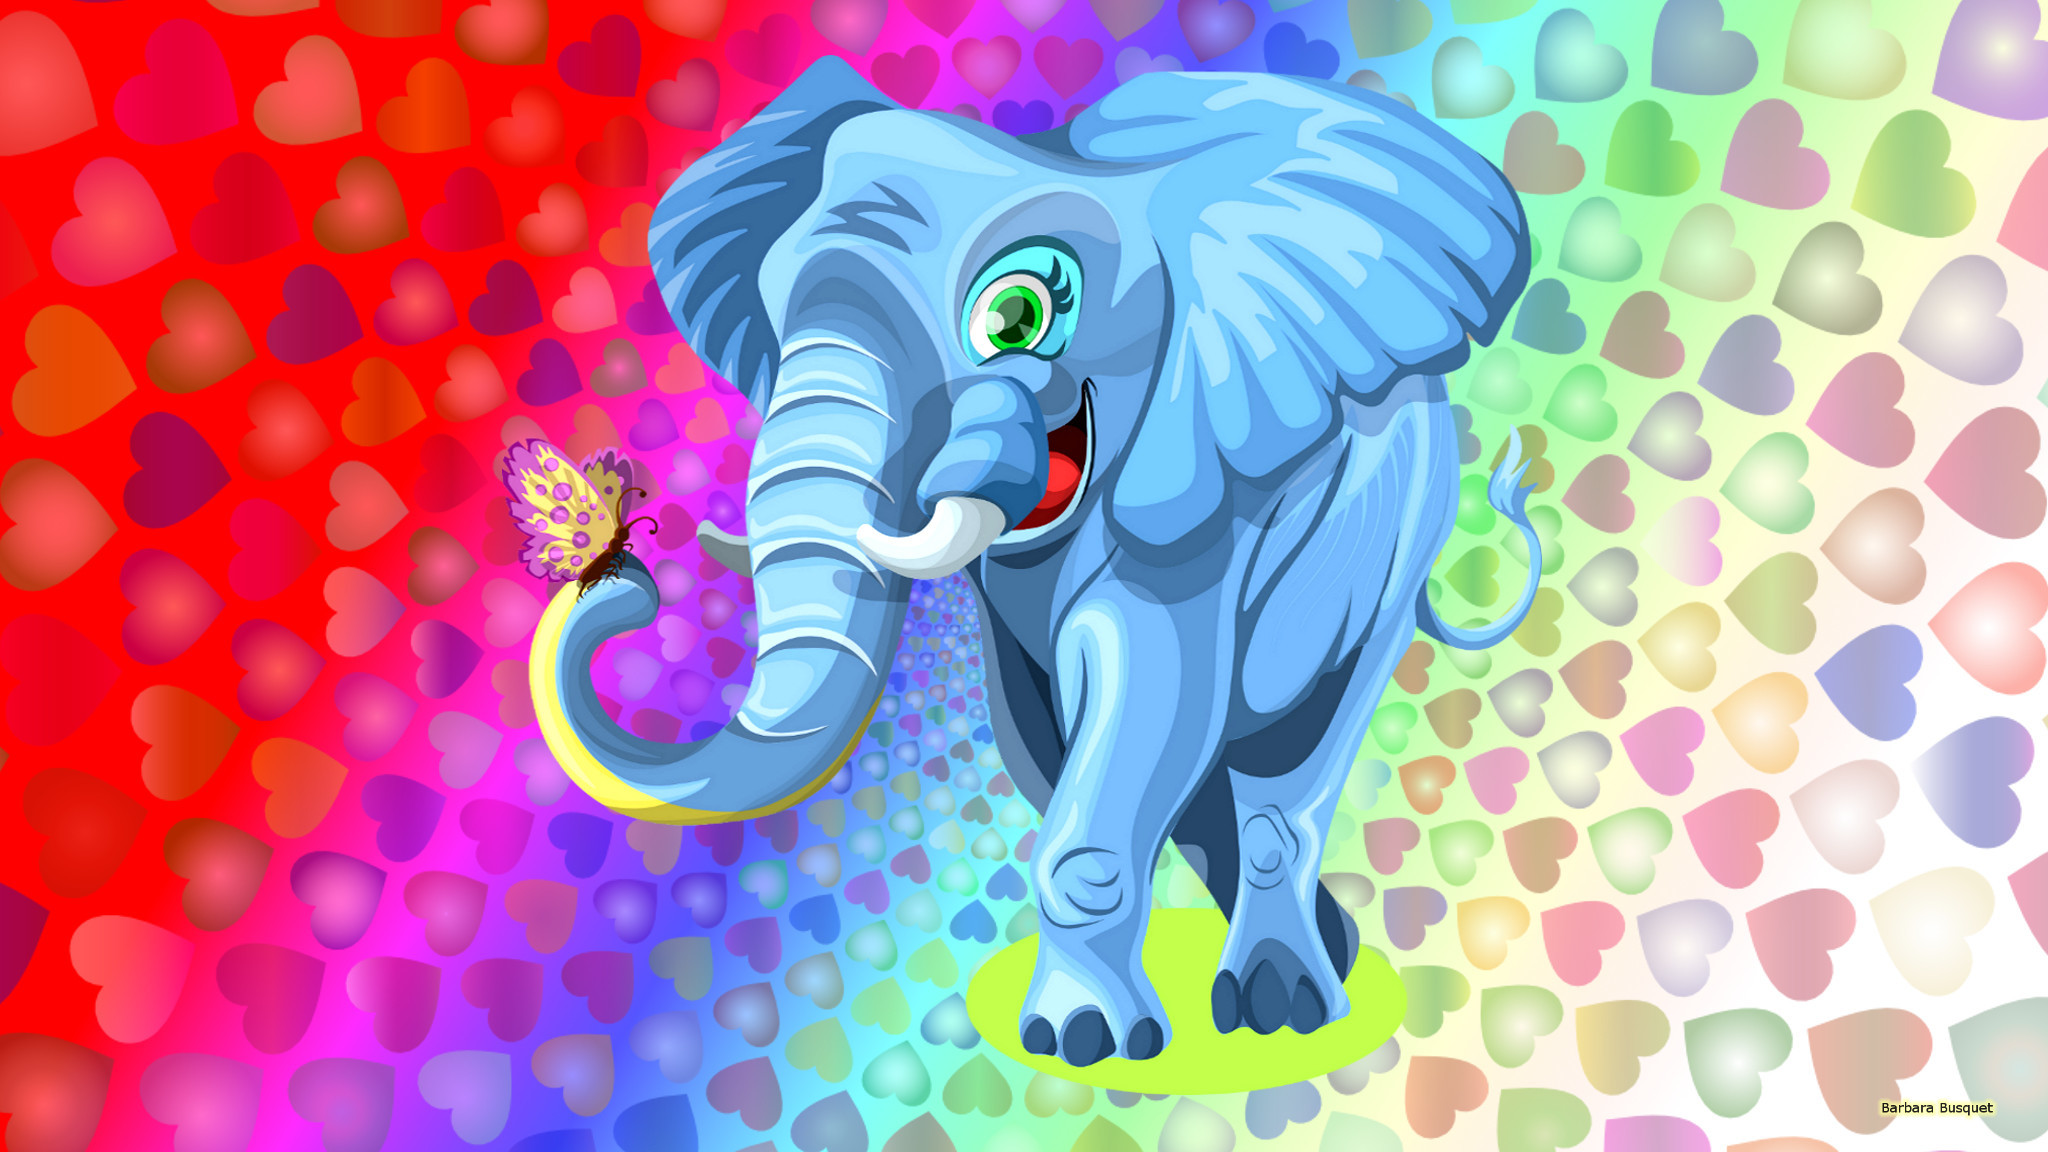 2048x1152 Colorful wallpaper with elephant and hearts